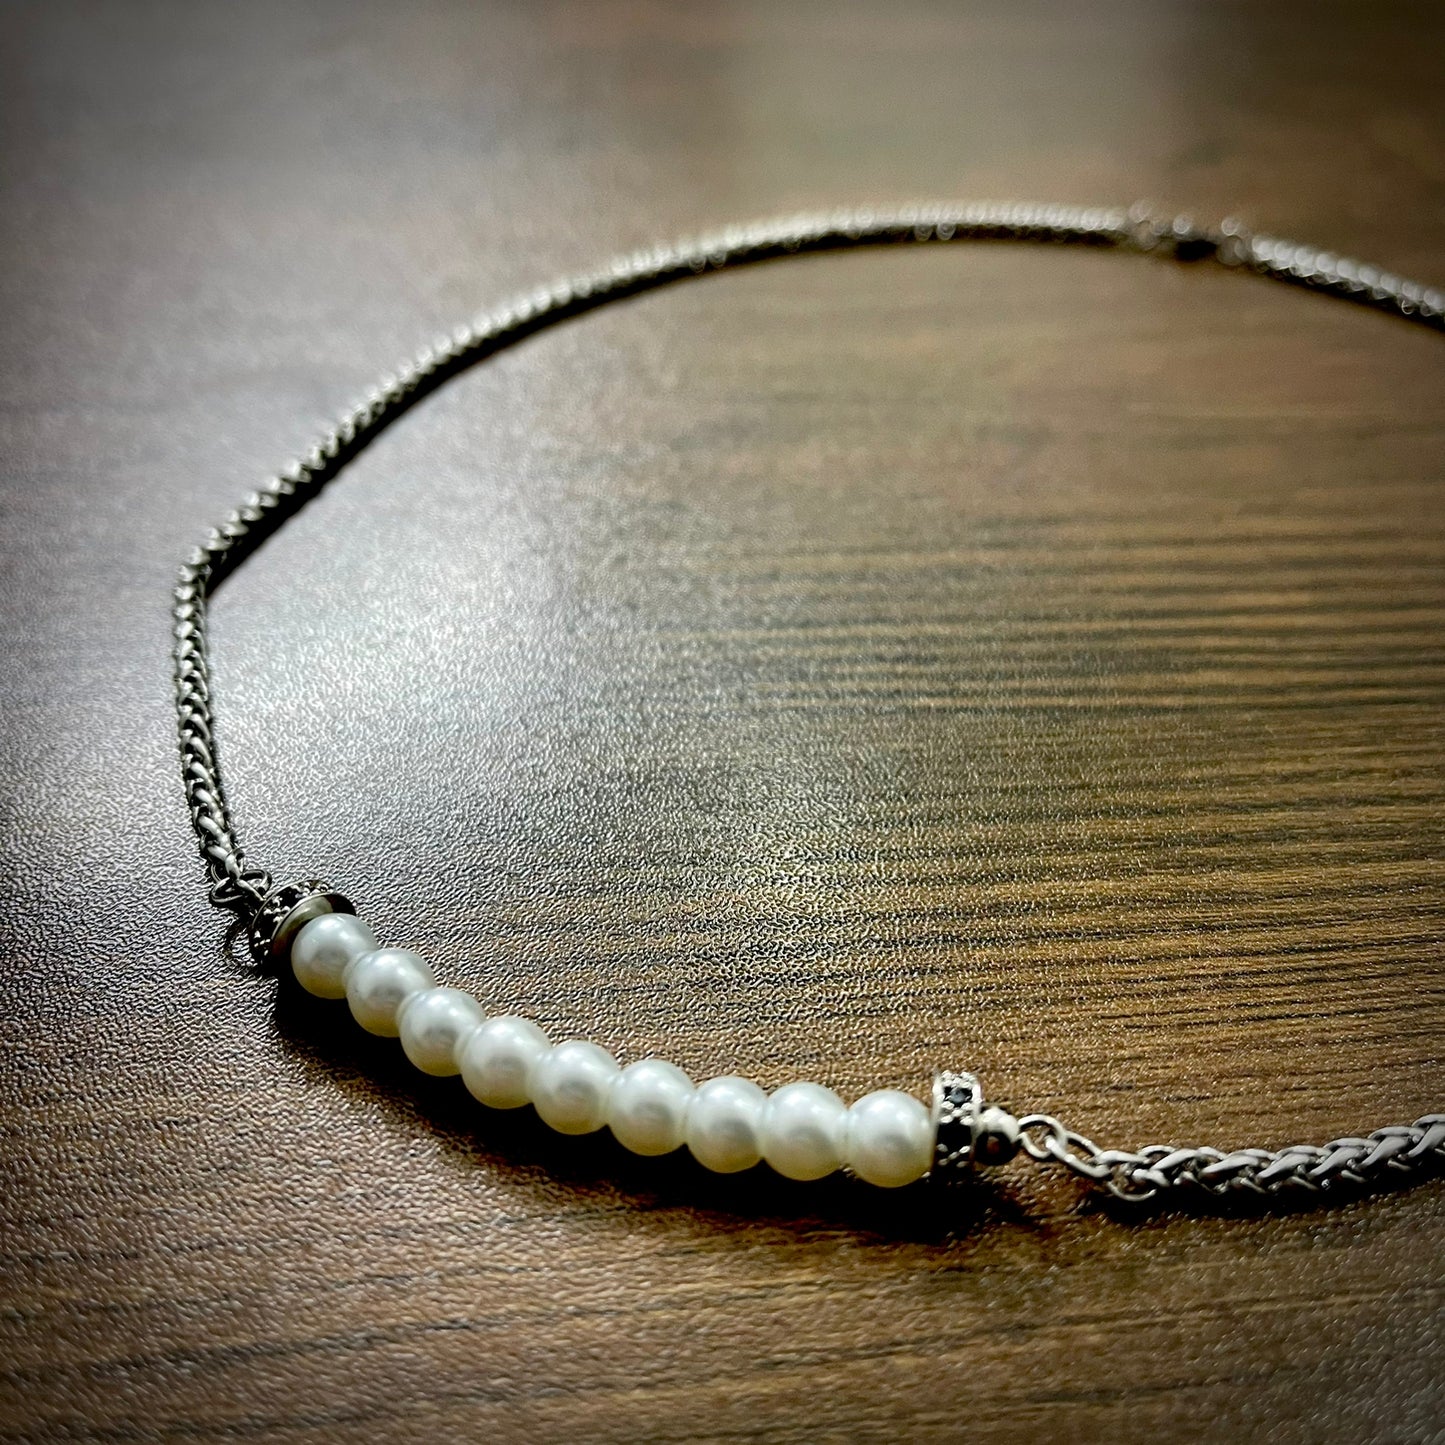 Classic Round Tube White Pearl Beads Pendant Necklace For Men